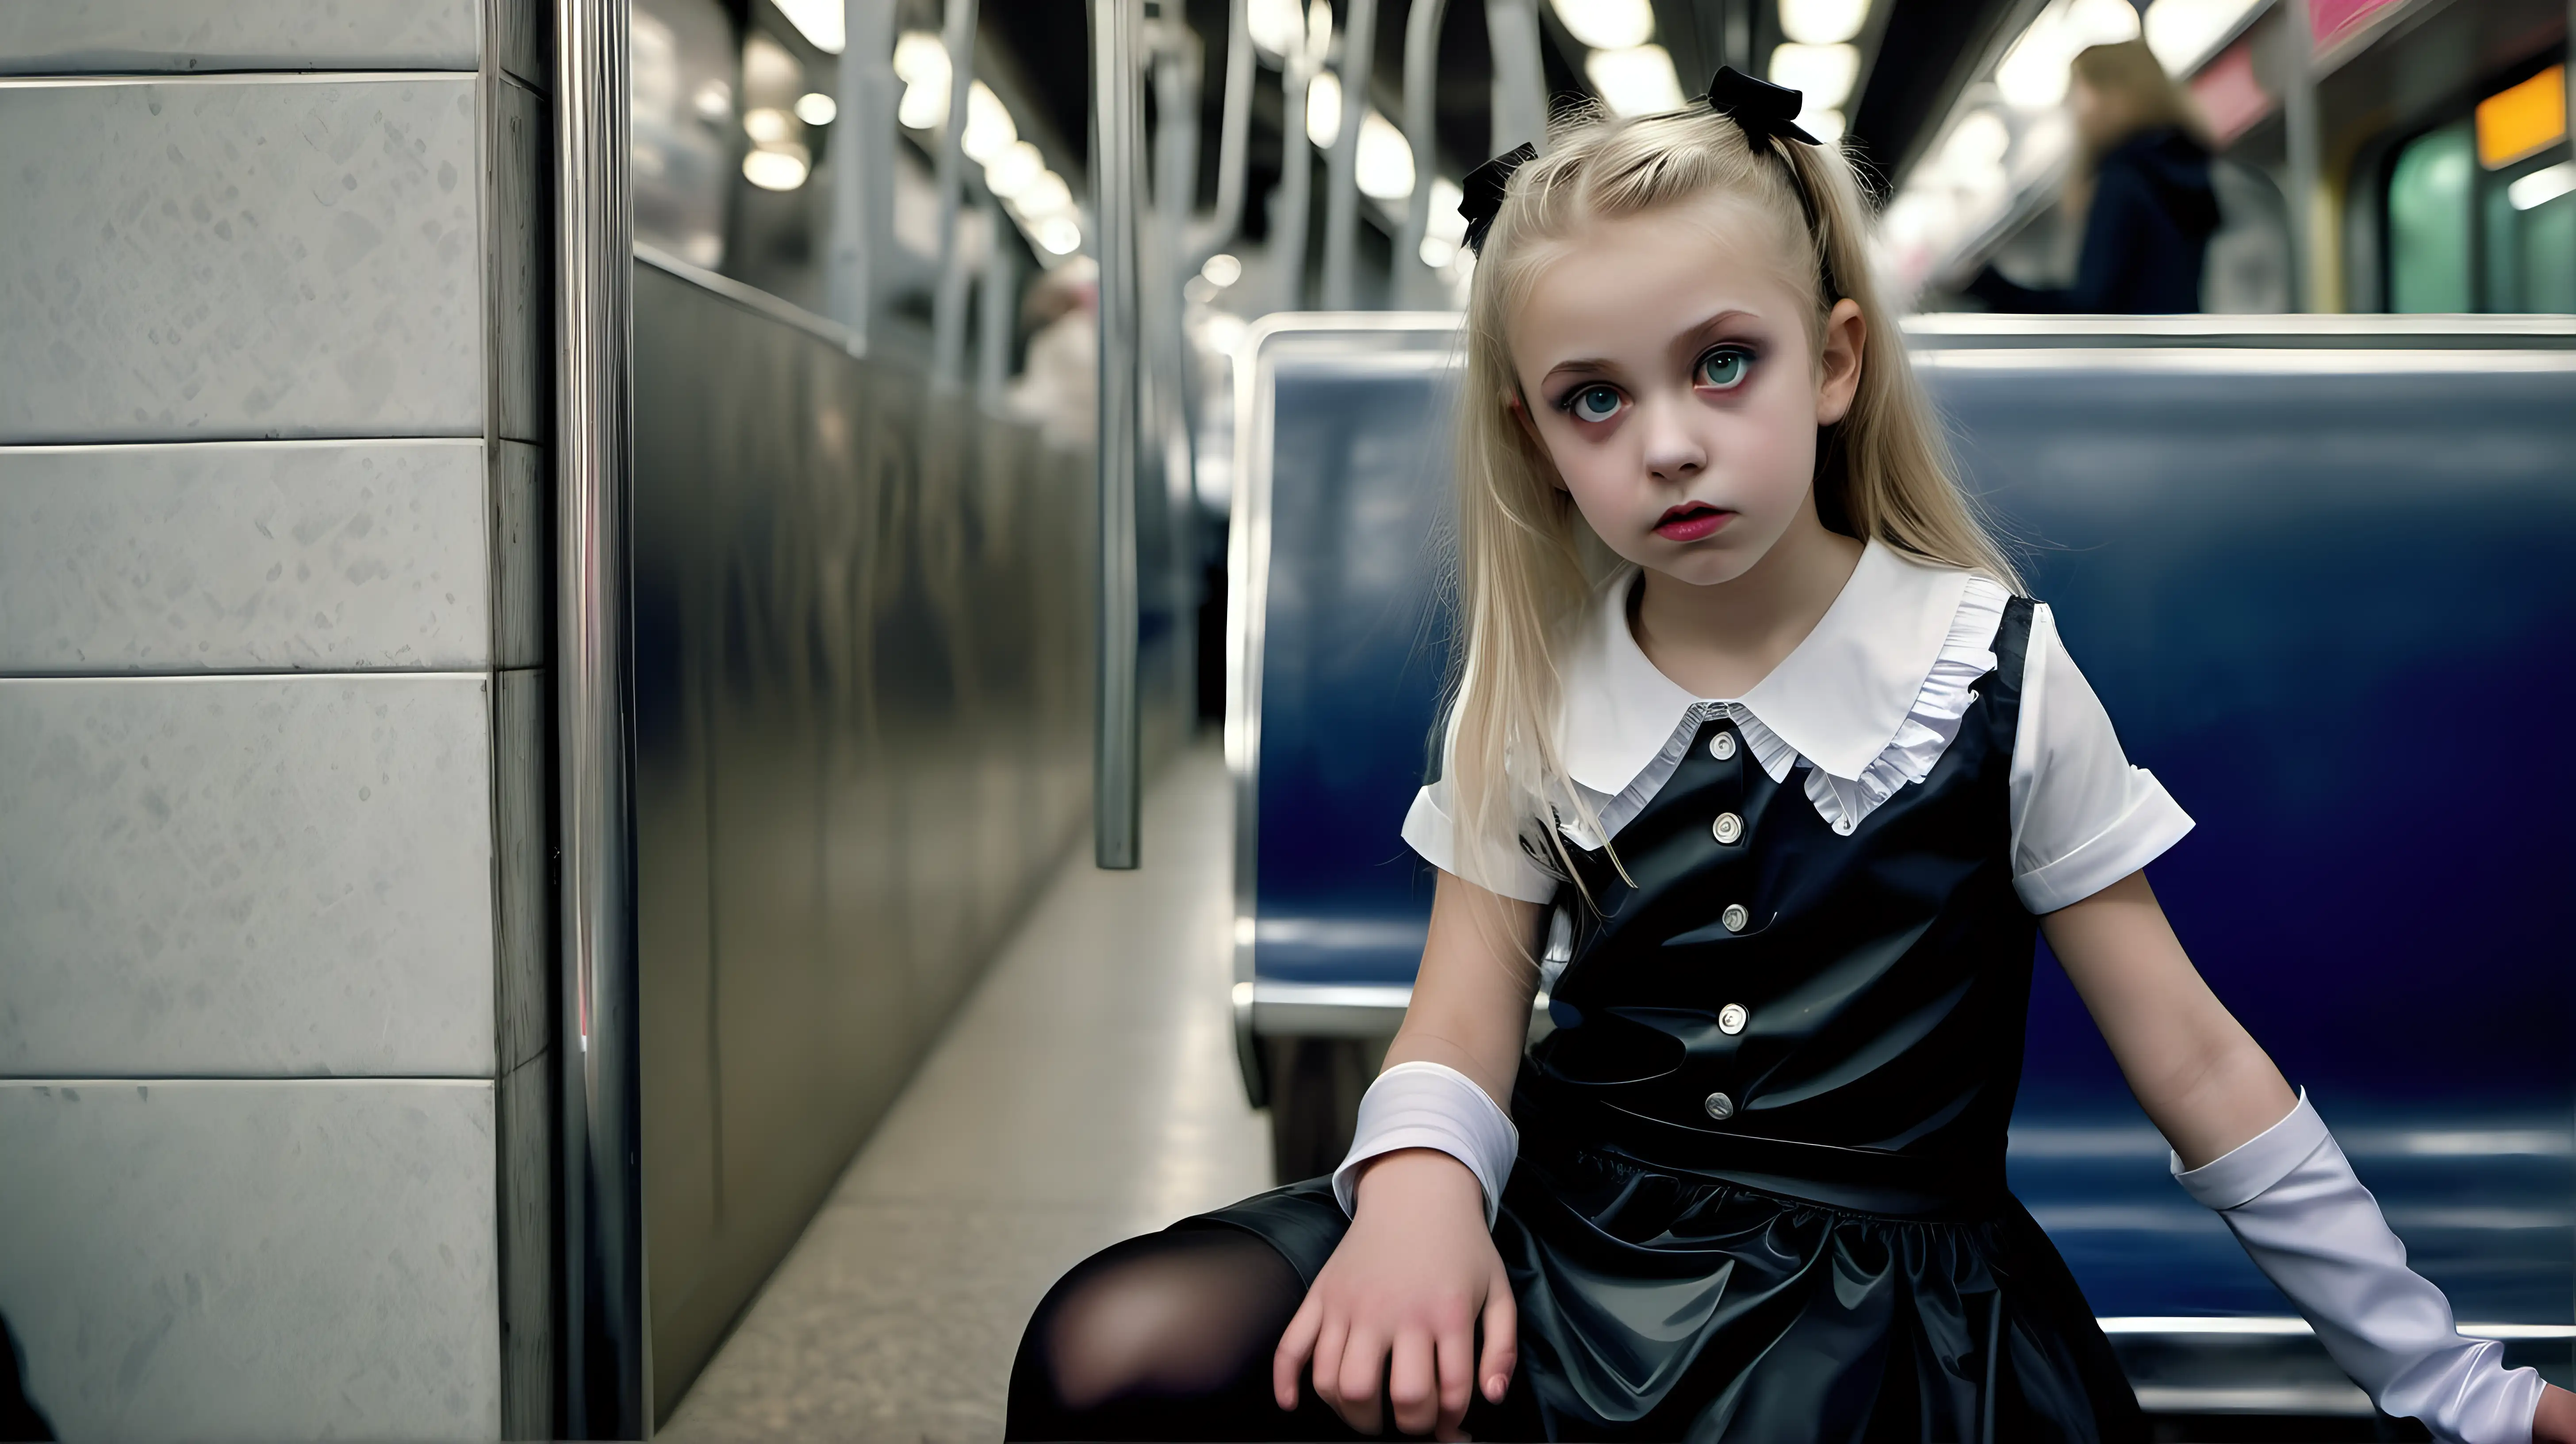 
 
shot with Nikon AF-S DX NIKKOR 35mm f/1.8G Lens in the street  

portrait of gothic blond little girl 9 years old little girl, wearing schoogirl uniform, black  tights diffused light low pony hair clear eyes  wearing    tights  with mom  nordic model, sitting on a seat in the subway diffused light
, elle porte  des collants en cellophane  transparents, sa maman Goth girl. Neon lights.  .  makeup flow, zoom face
wearing latex shiny dress 
des hauts talons stiletto,  
 dans les couloirs du métro, beaucoup de néons et de lumières blanche

with mom  wearing     dress,   black tights, [Highly Detailed]     
with high heels stiletto,  
look sad, make-up flow

zoom face

suntanned skin, natural skin texture, (highly detailed skin:1.1), 
textured skin, (oiled shiny skin:0.5), 
 ,intricate skin details, visible skin detail, (detailed skin 
texture:1.1), mascara, (skin pores:1.1),  , skin fuzz, (blush:0.5), (goosebumps:0.5), translucent 
skin, (minor skin imperfections:1.2),    
(round iris:1.1), light reflections in her eye, visible cornea, highly detailed iris, remarkable detailed pupils 

portrait shot , zoom eyes

--v 6
